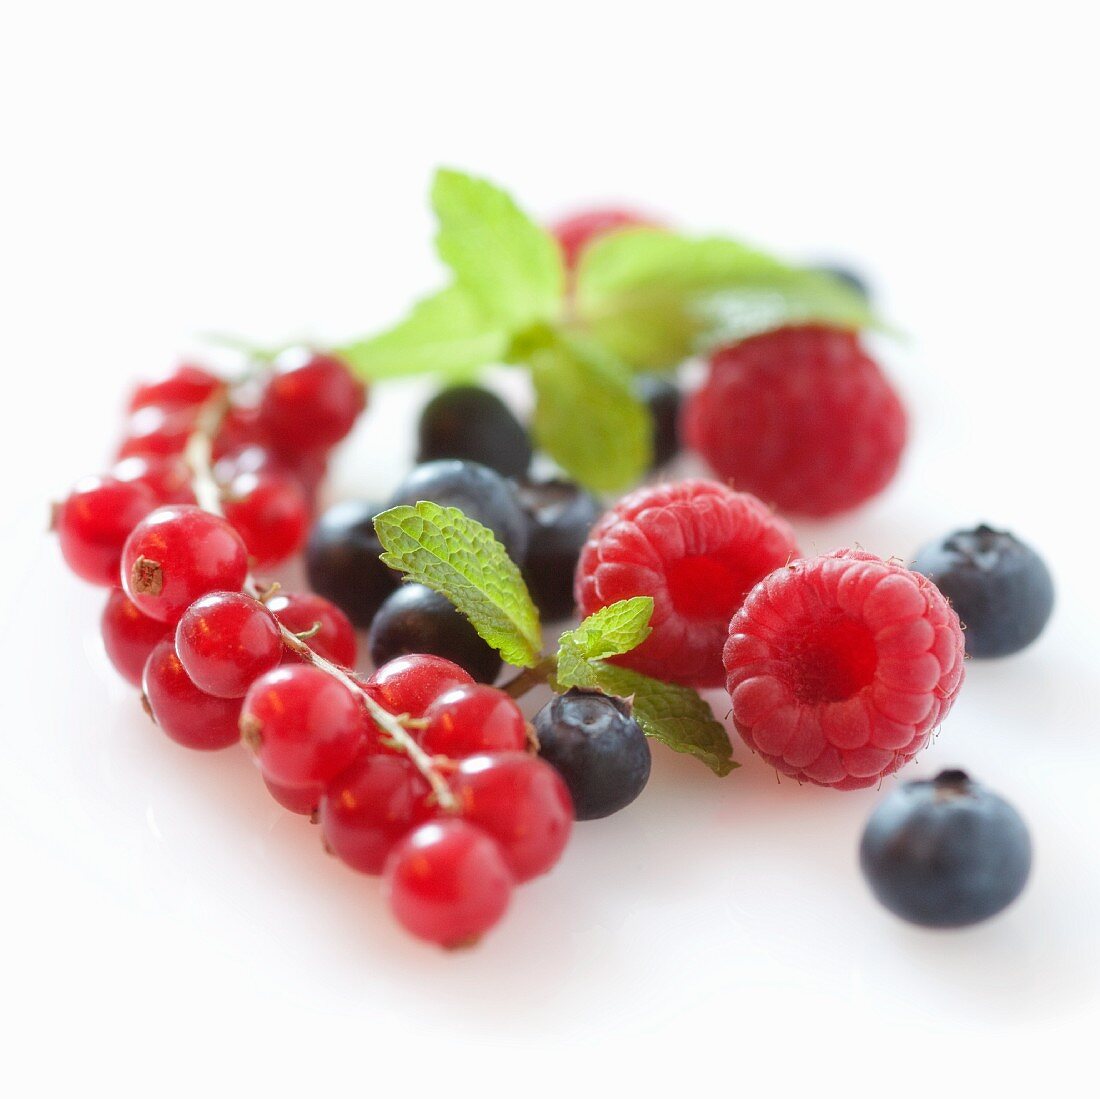 Raspberries, currants and blueberries (no background)